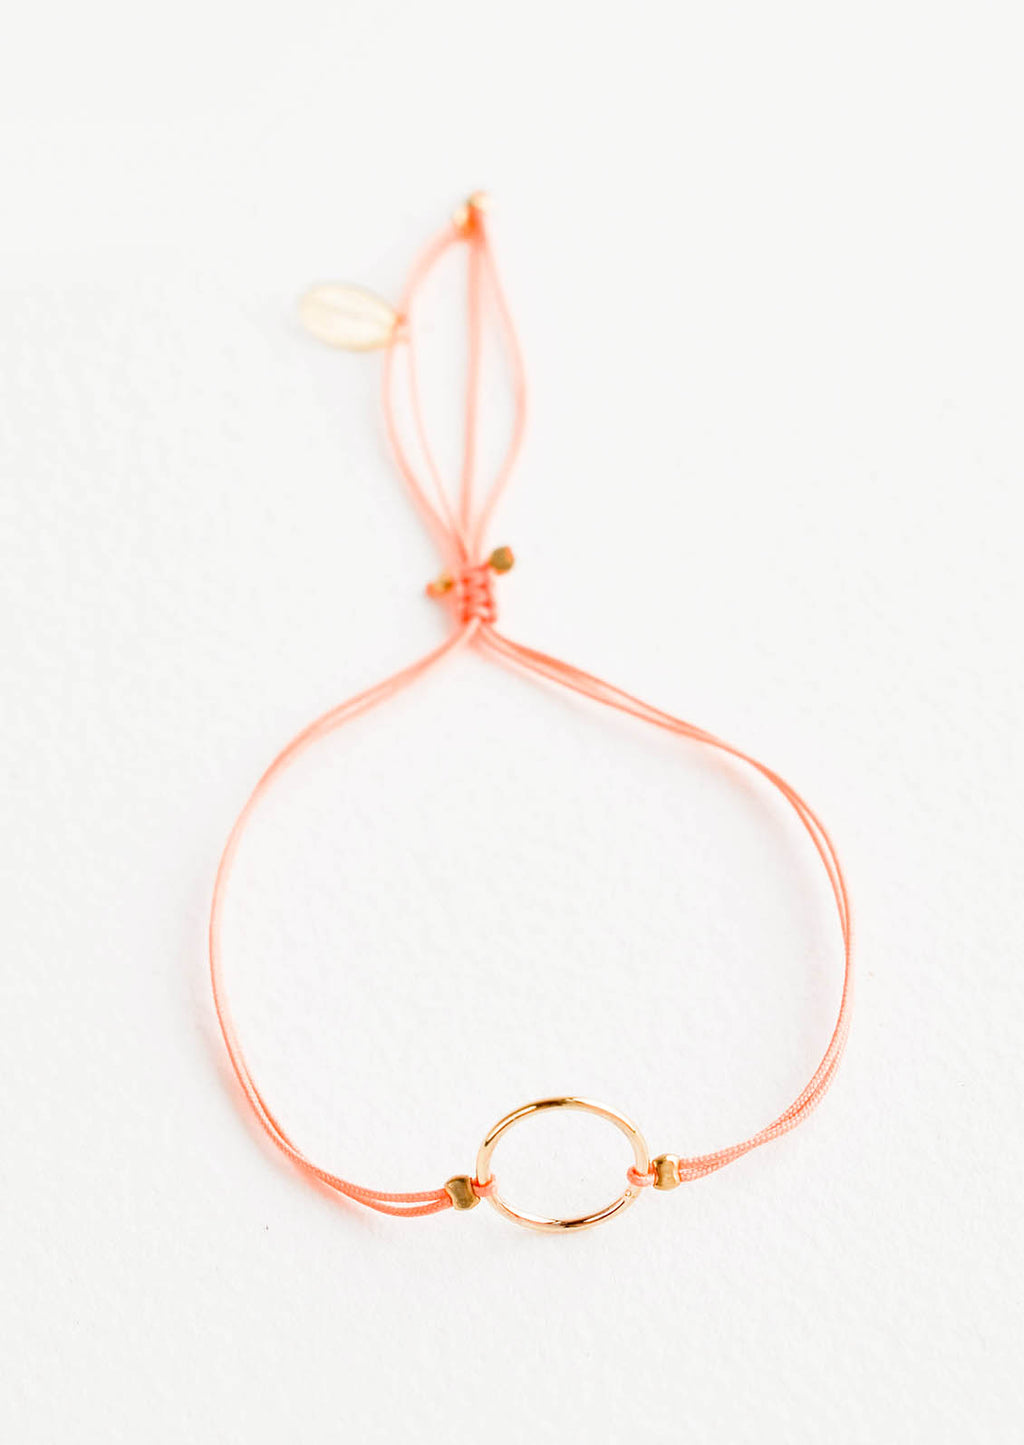 Peach: Bracelet with yellow gold circle charm centered on an adjustable peach string.